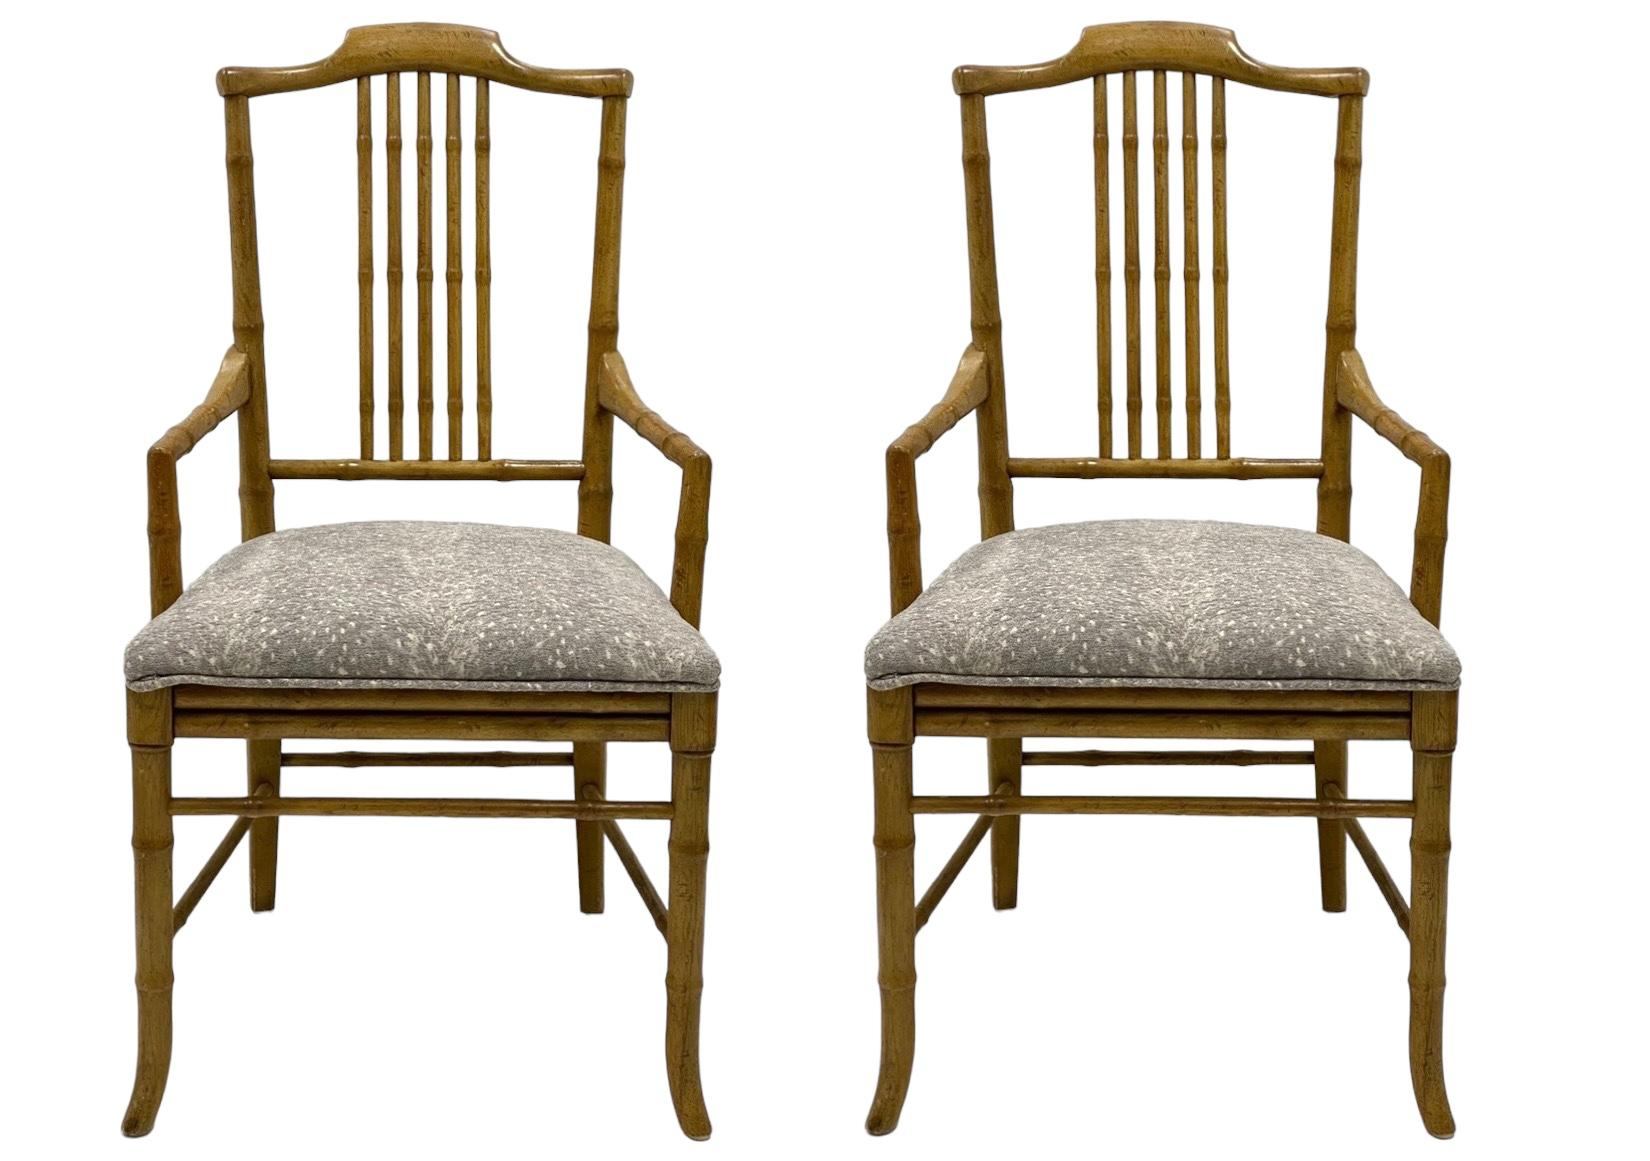 1970s Regency Style Faux Bamboo Bergere Armchairs In Grey Fawn Upholstery -Pair For Sale 6